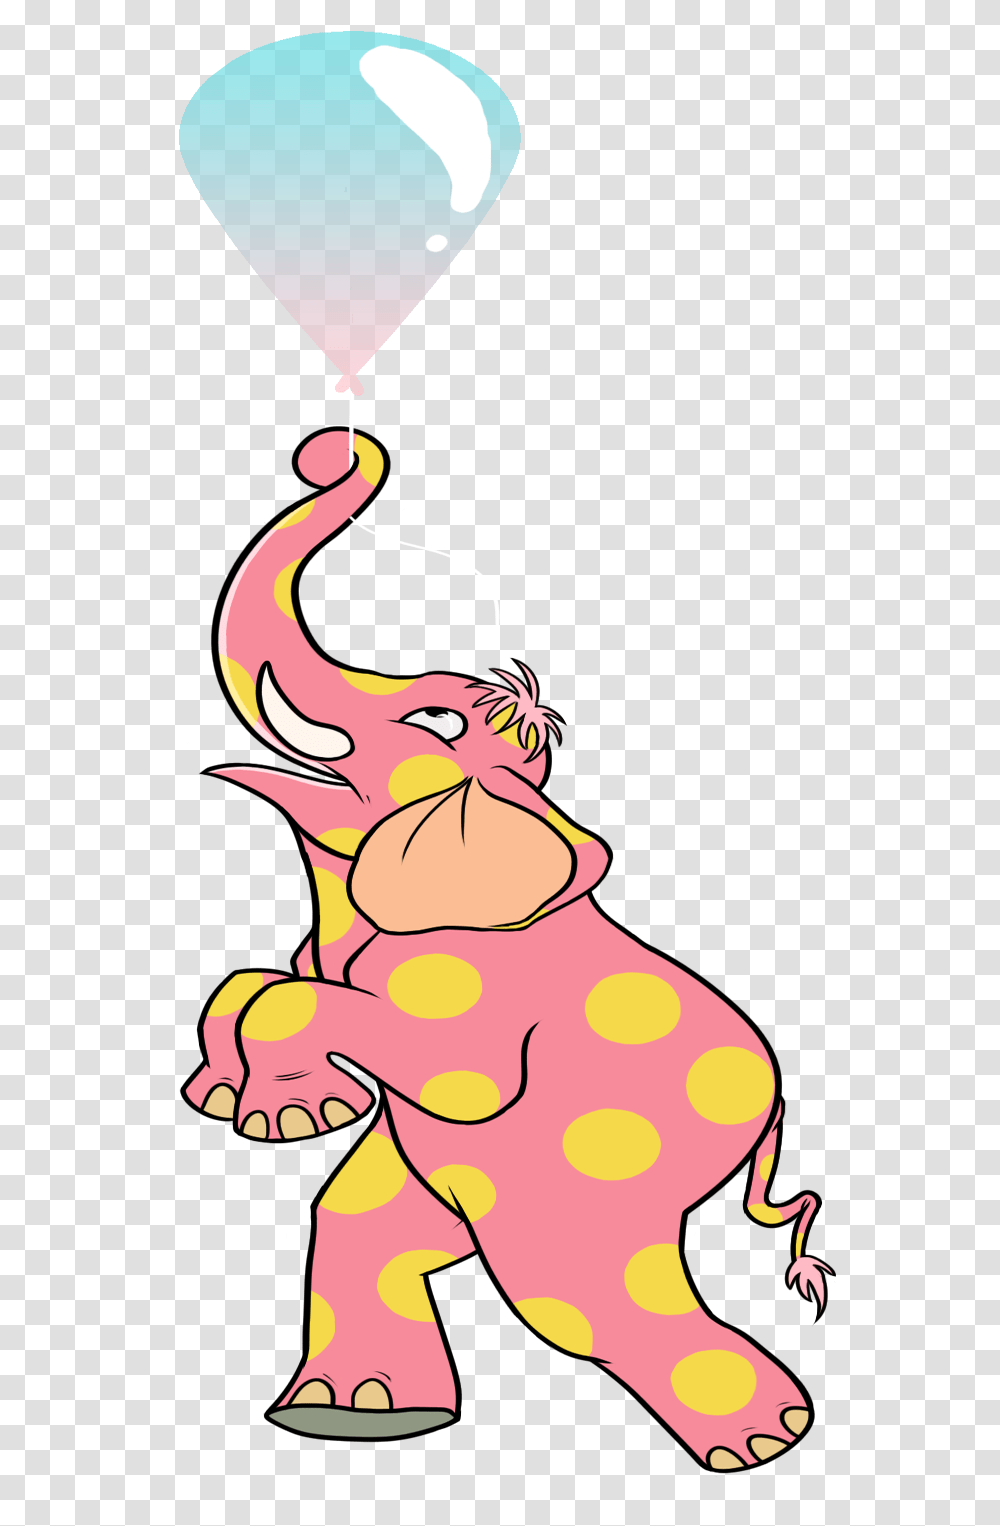 The Pink Elephant With Golden Spots Illustration, Person, Human Transparent Png